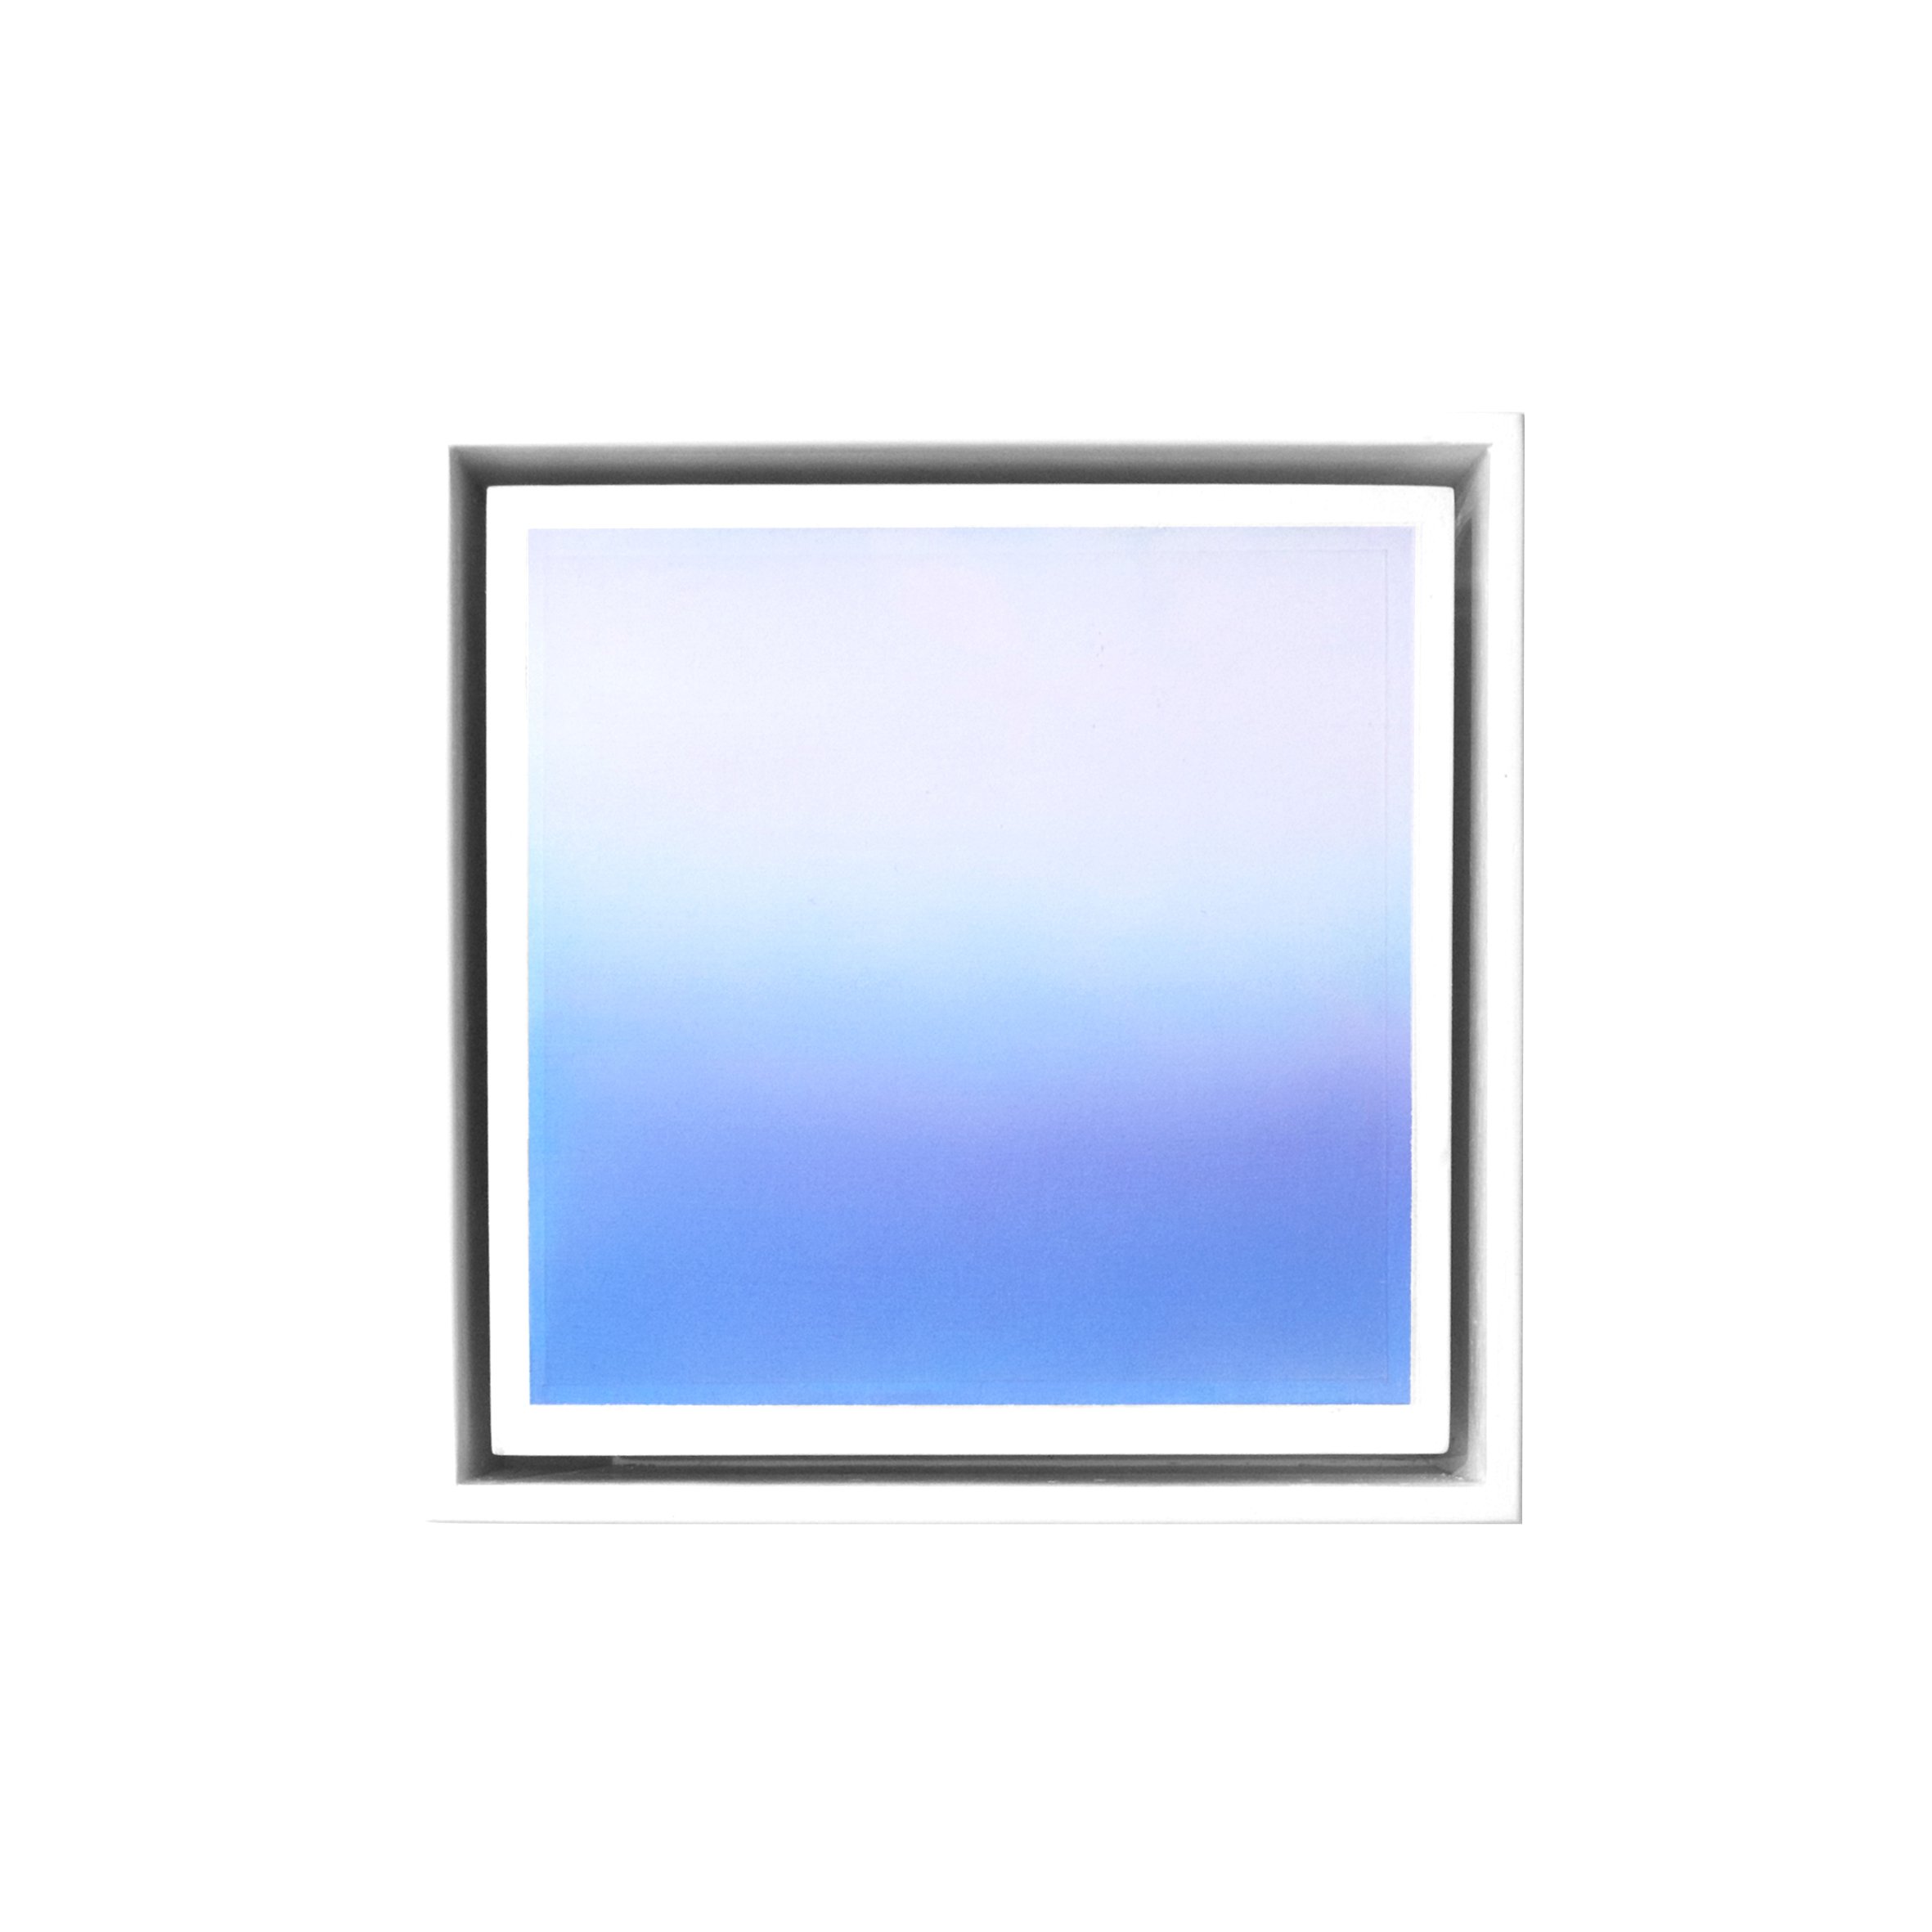   Weightless/Endless  2016, pigment on board, 130 x 130 mm (framed). 